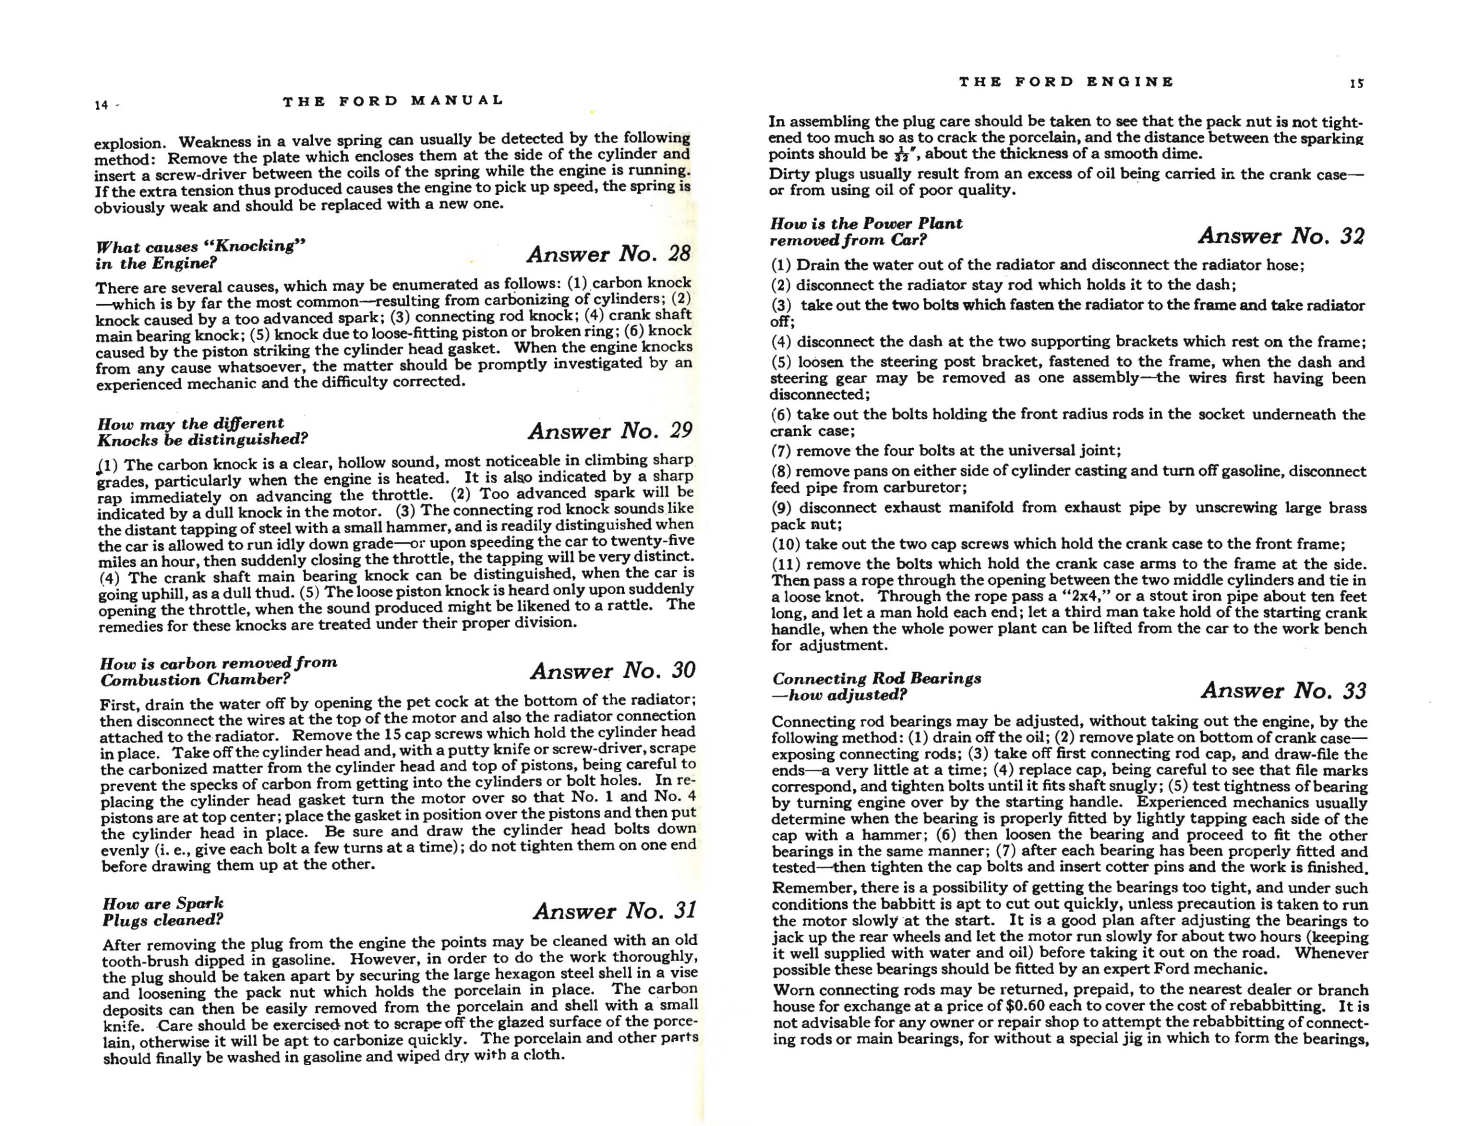 1924_Ford_Owners_Manual-14-15